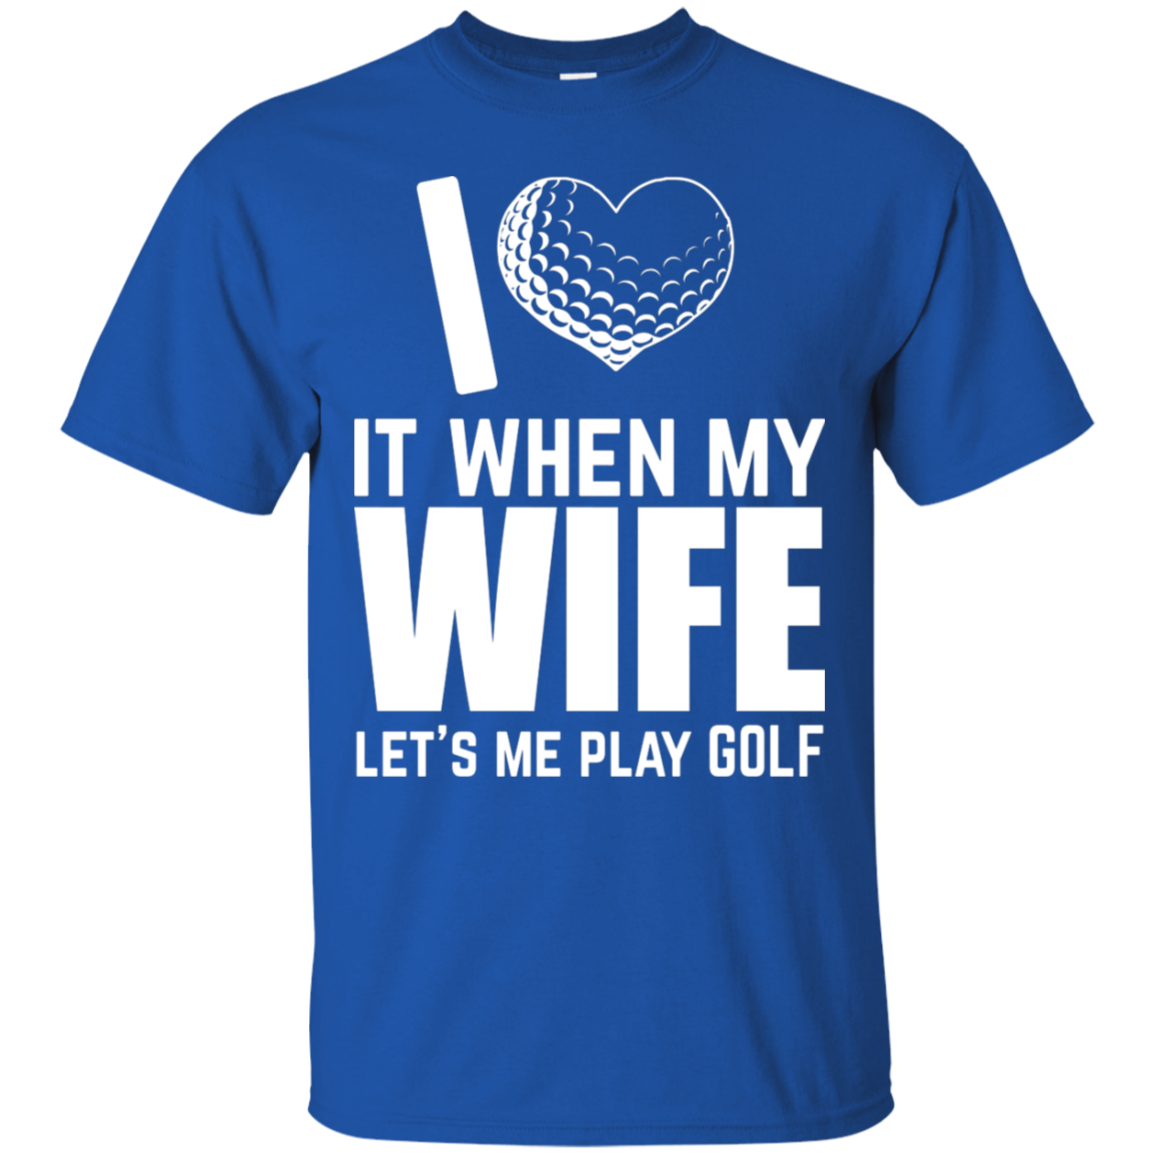 I Love It When My Wife Lets Me Play Golf T-Shirt Apparel - The Beer Lodge